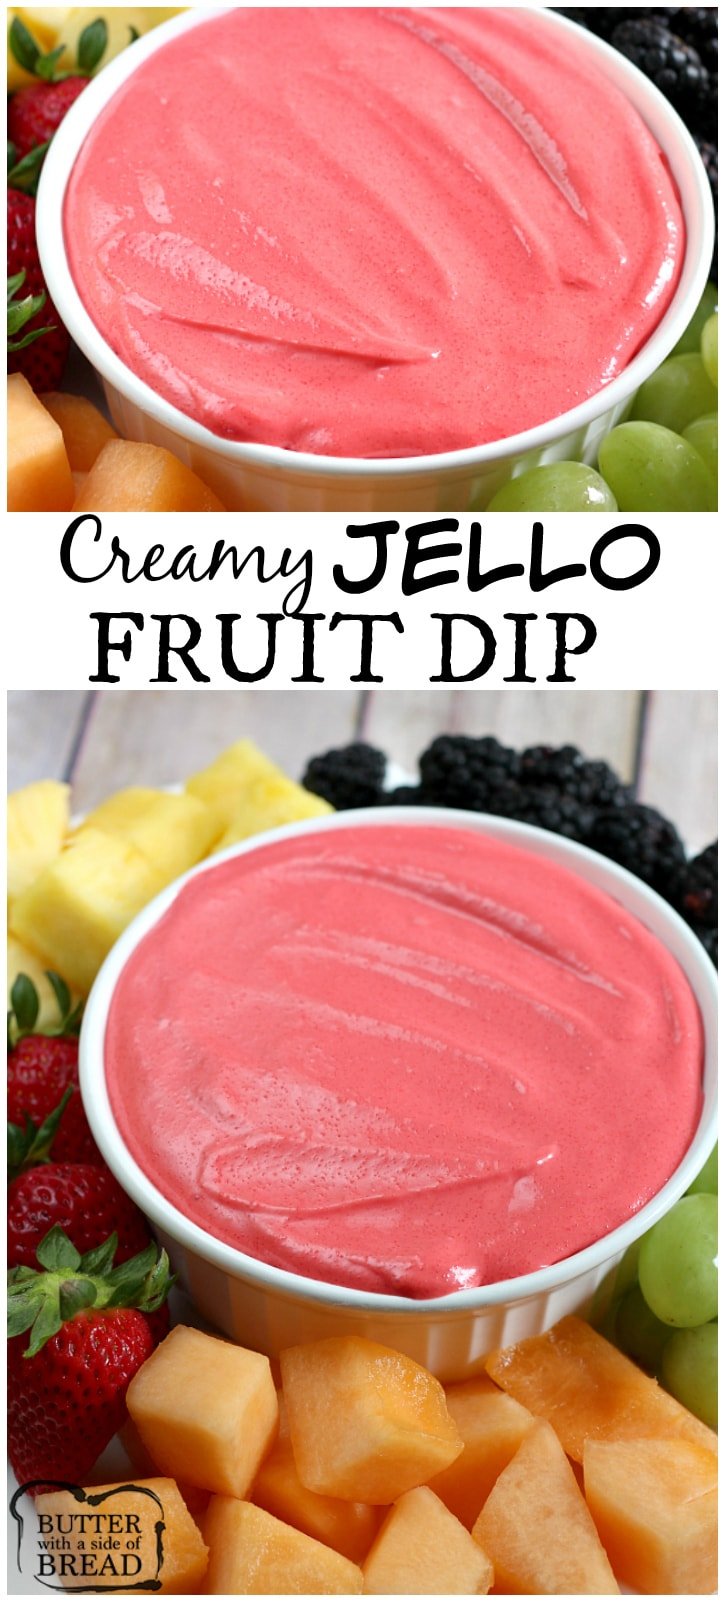 Creamy Jello Fruit Dip is made with jello, cream cheese and milk - that's it! You can use any flavor of jello that you want in this delicious fruit dip recipe!